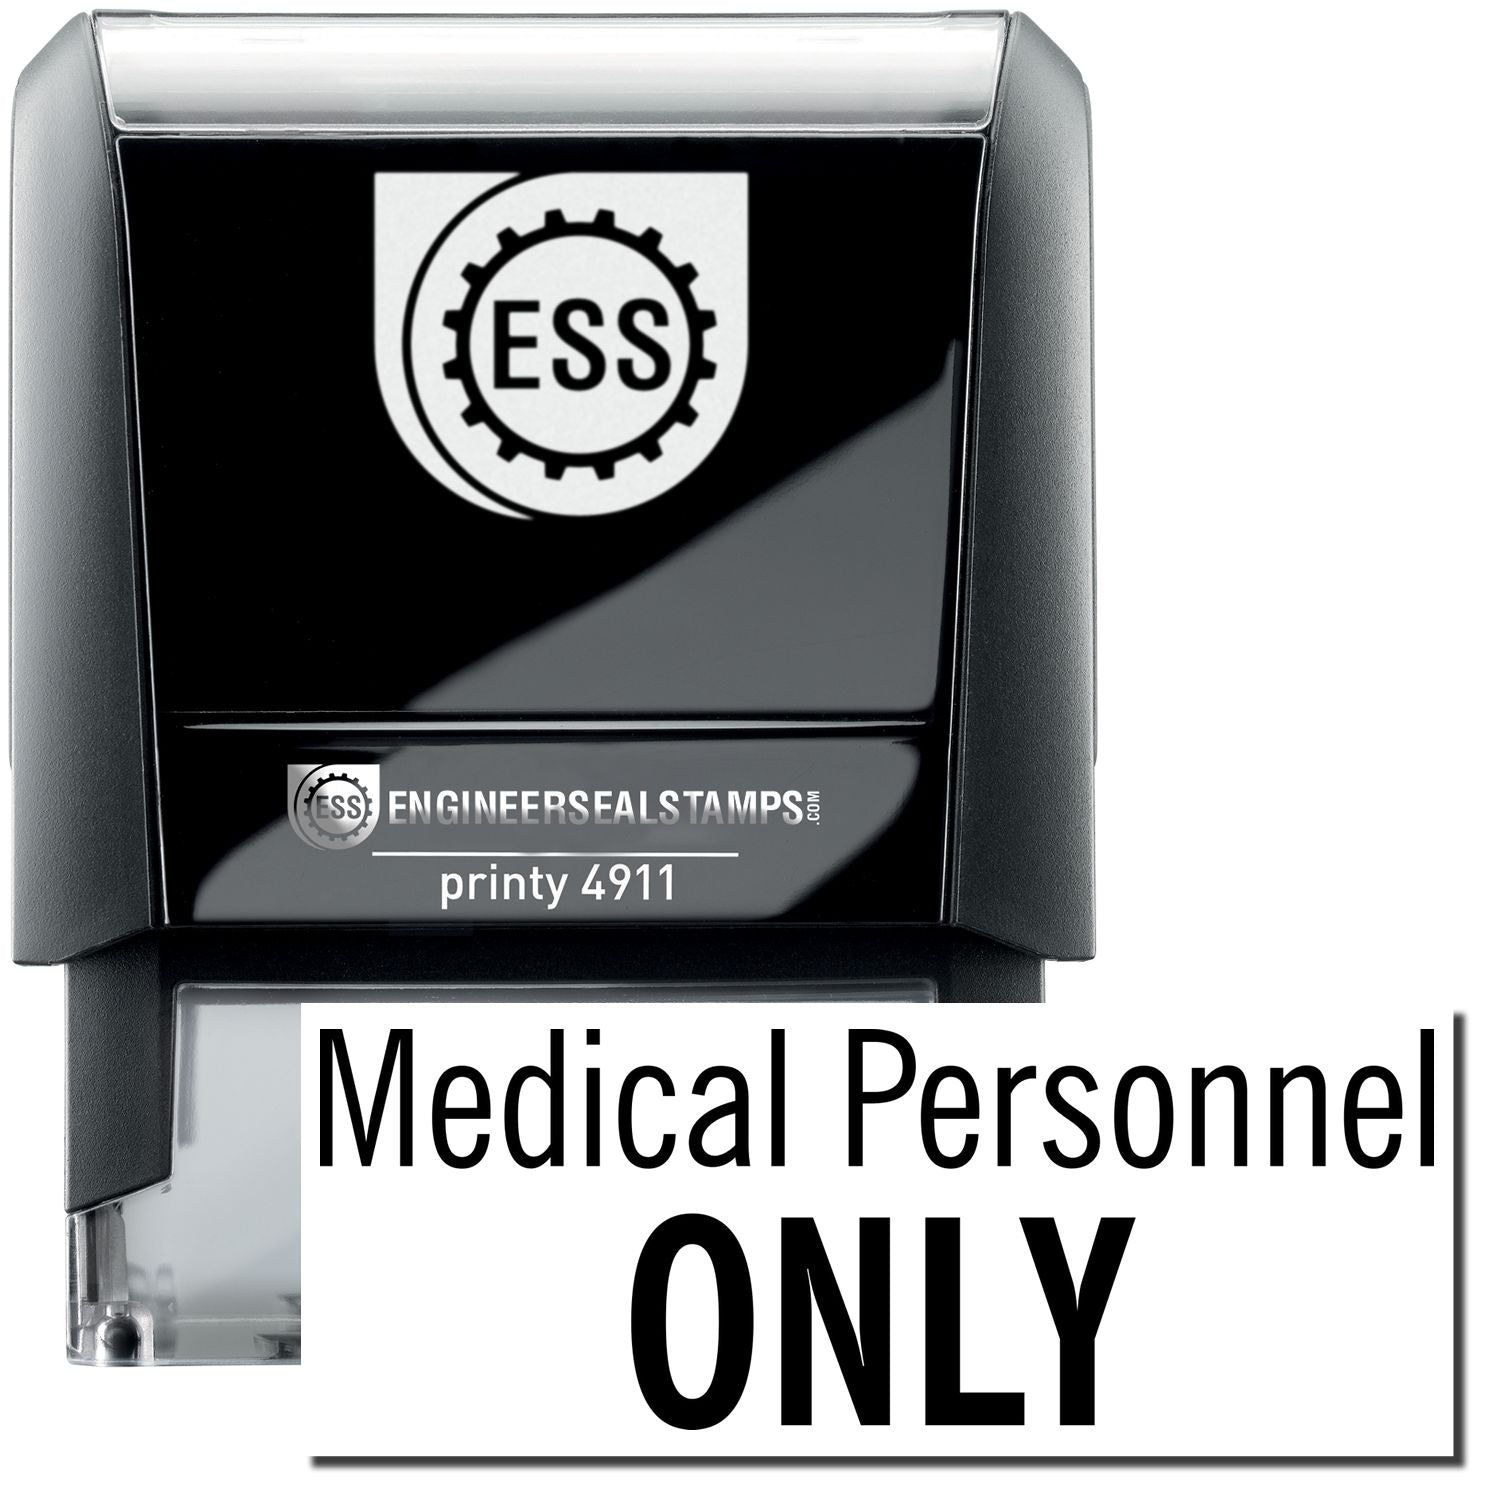 A self-inking stamp with a stamped image showing how the text "Medical Personnel ONLY" is displayed after stamping.